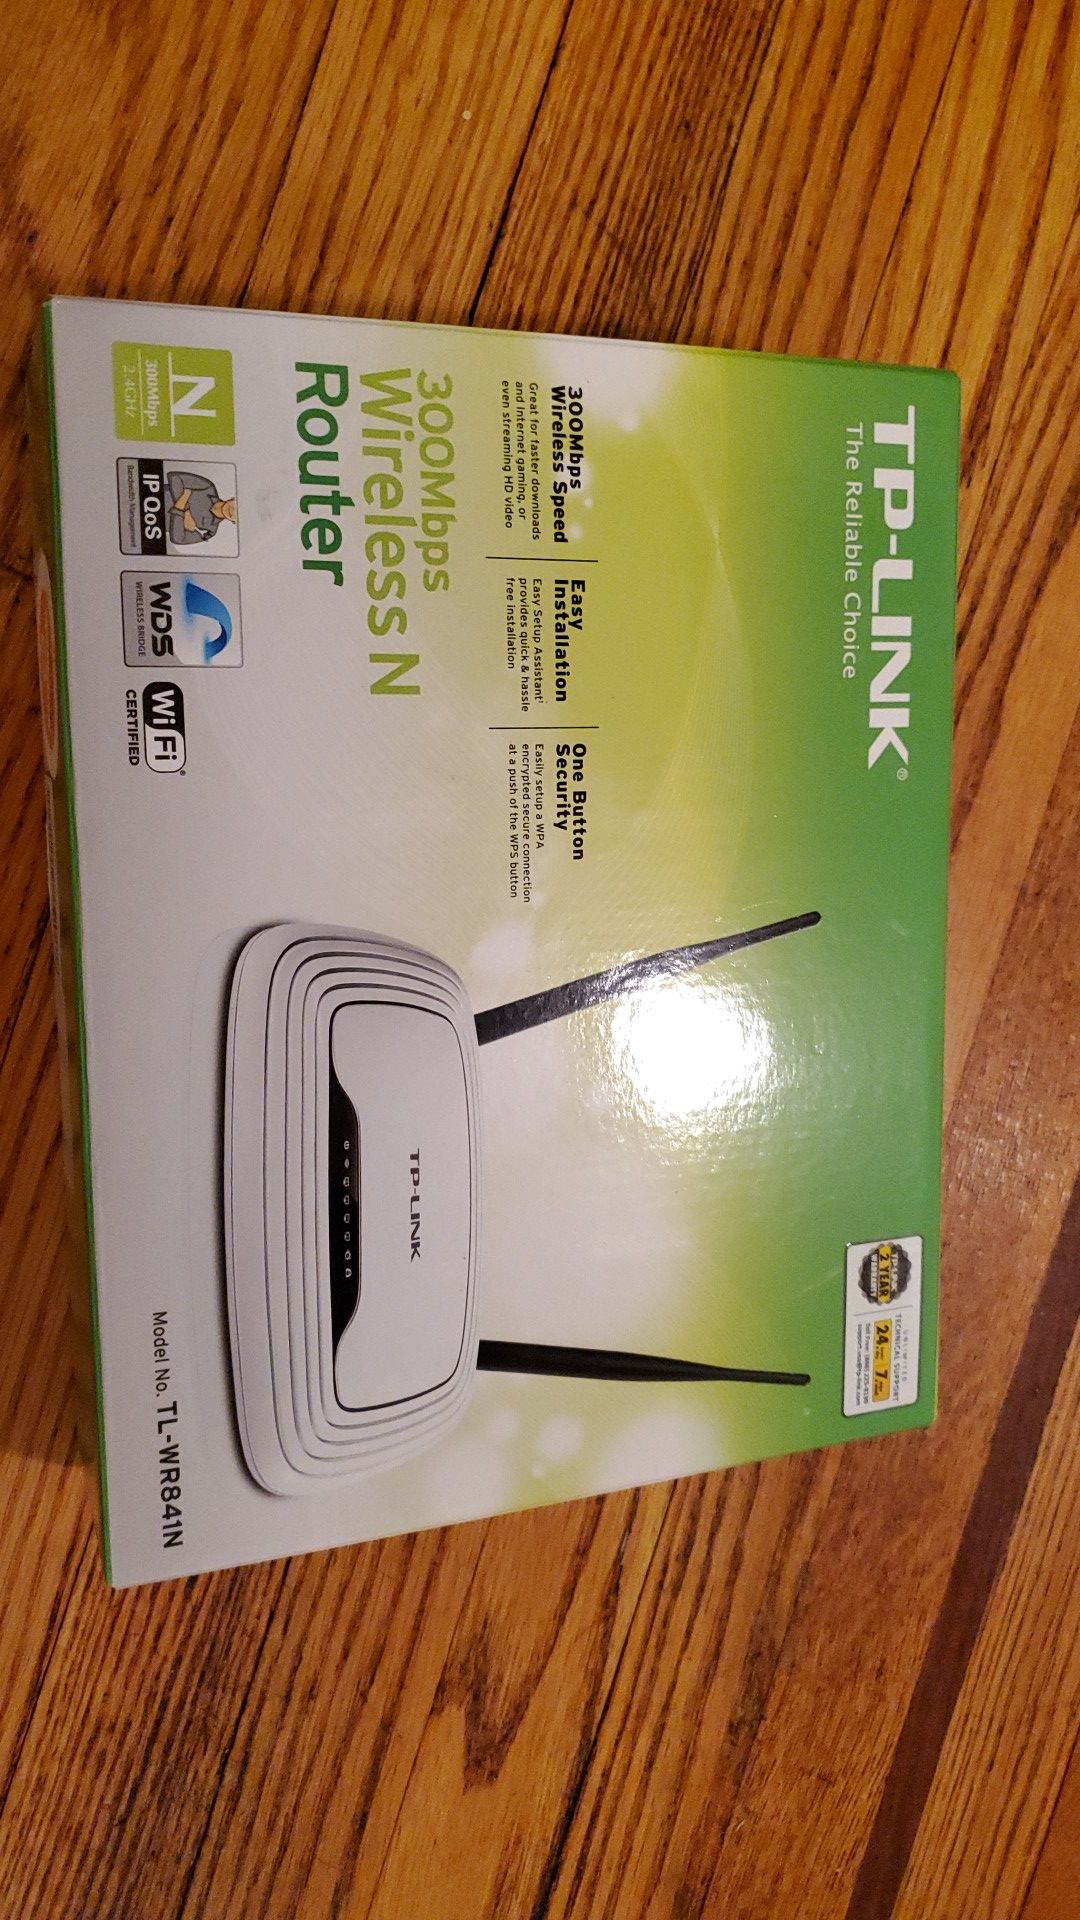 TP-LINK TL-WR841N 300 MBPS wireless n router